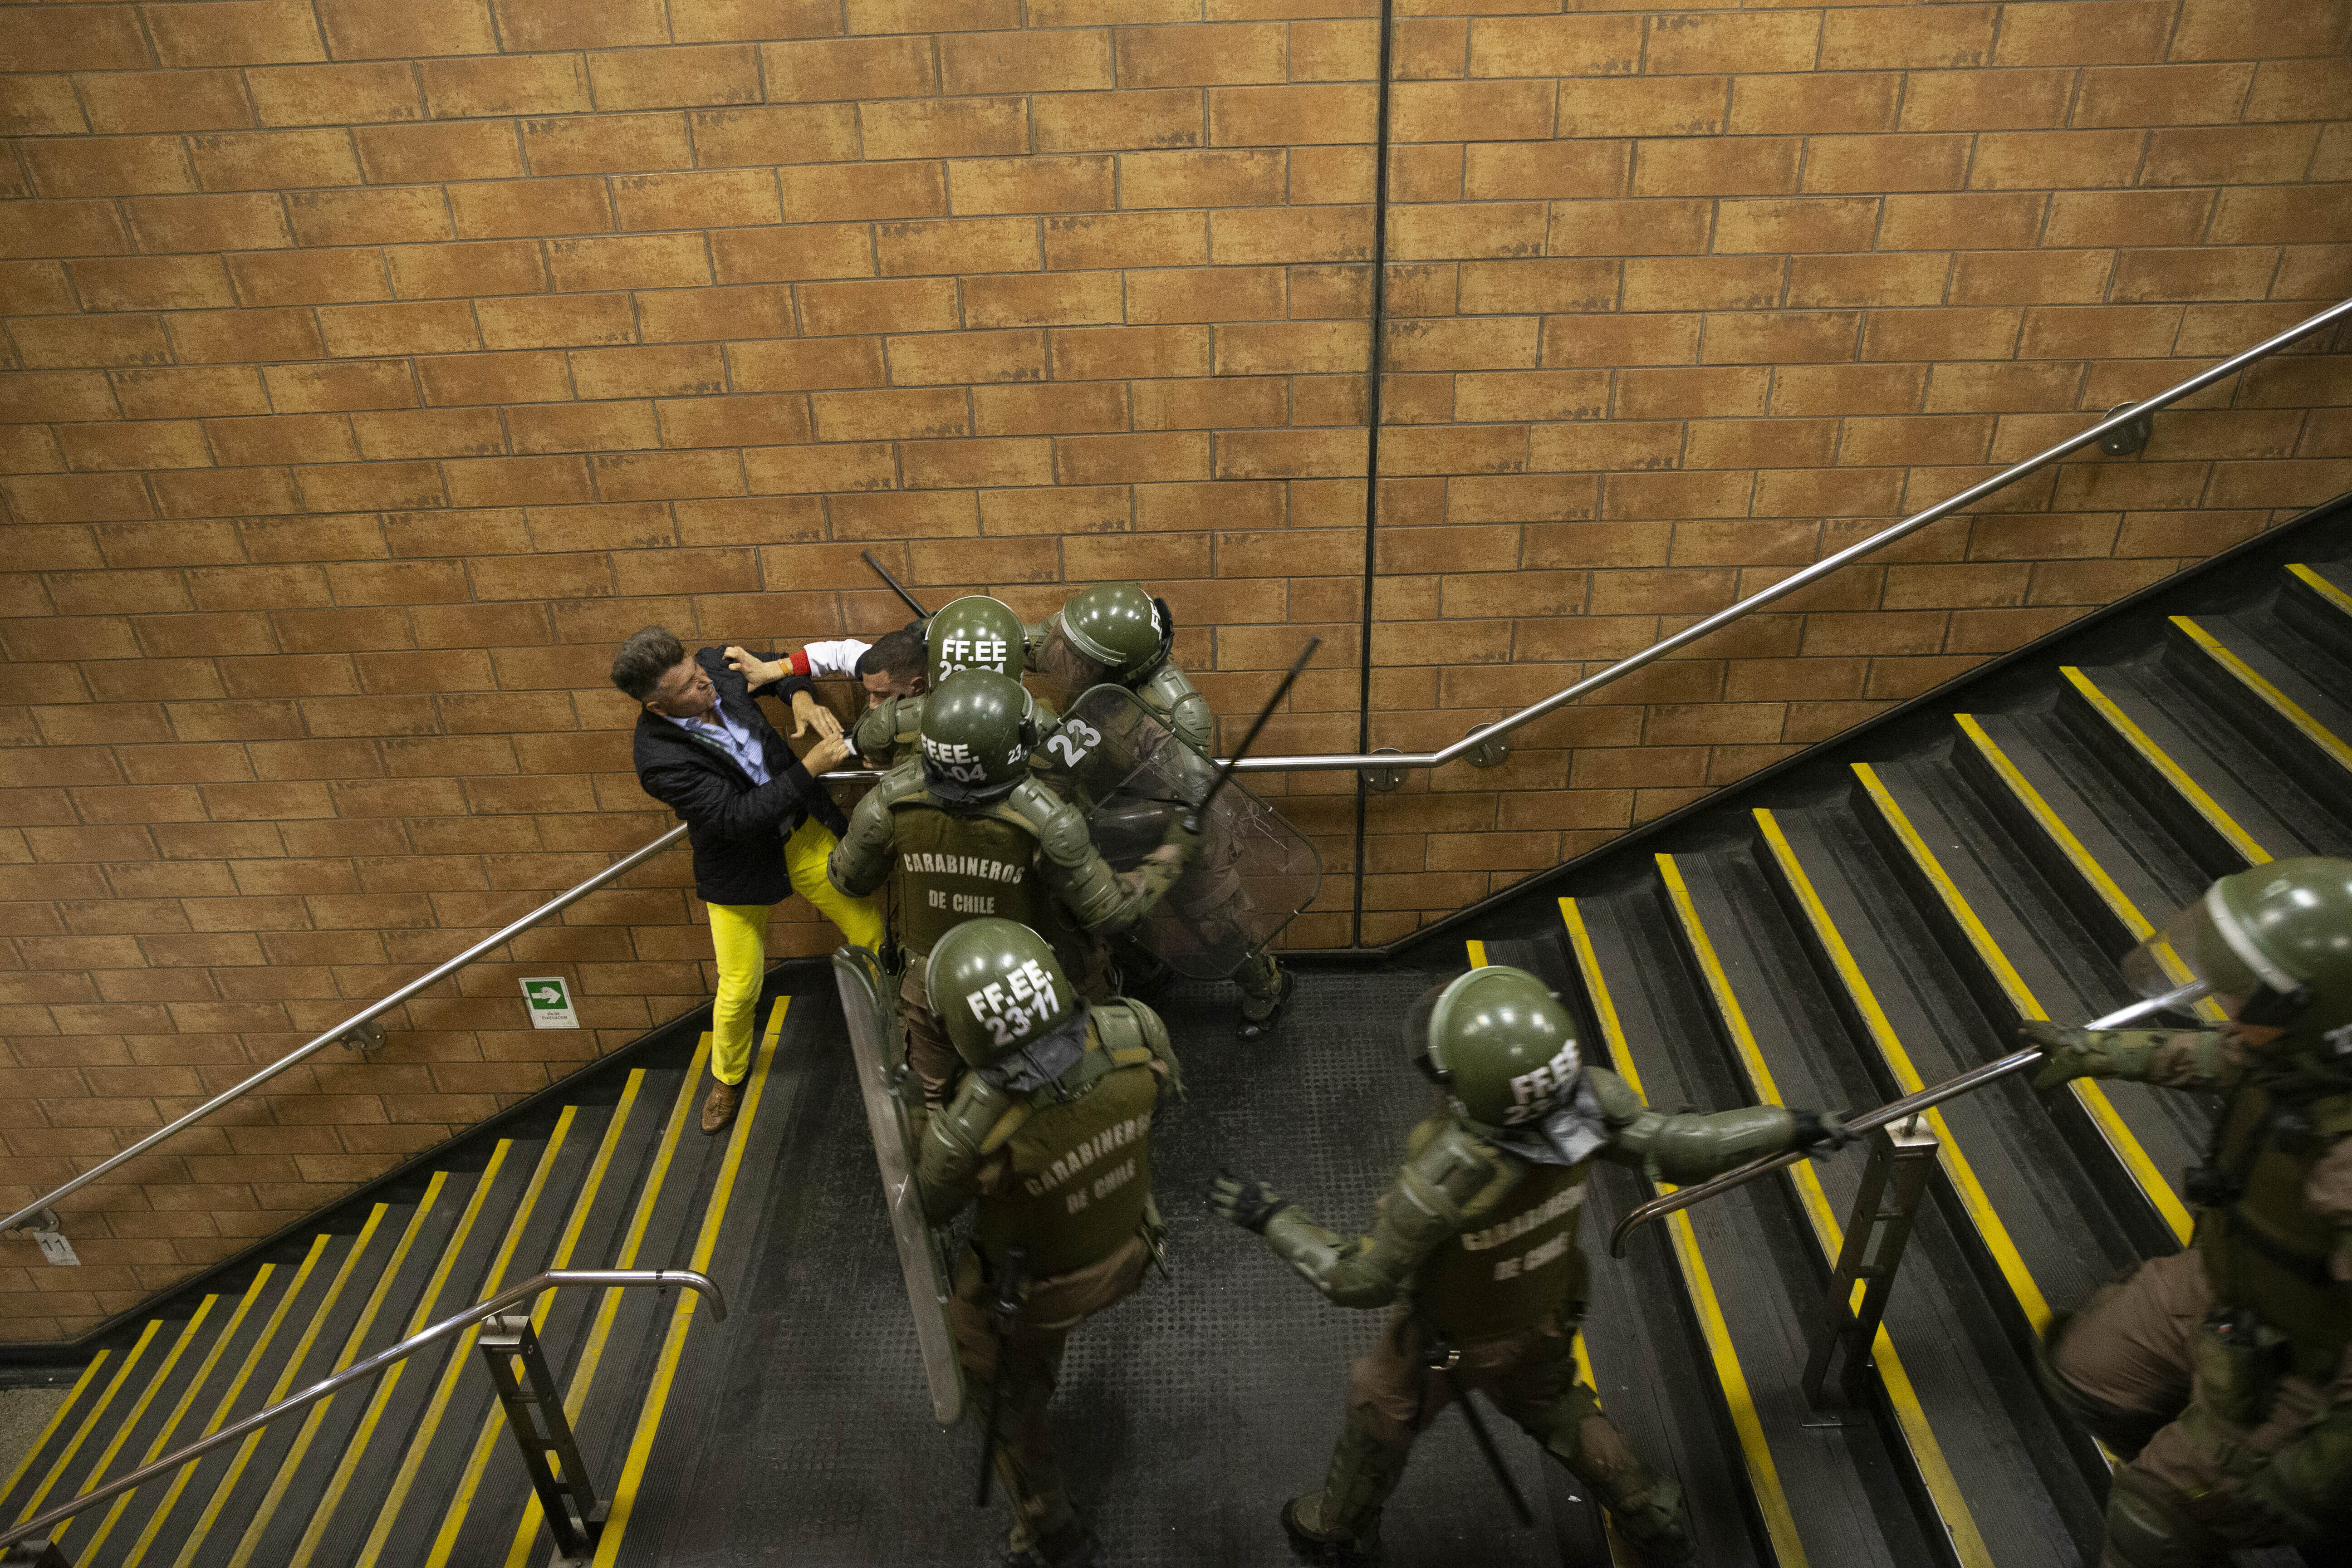 Chilean Carabineros separate two men who were fighting during a student protest against the rising cost of subway and bus fare, in Santiago, Friday, Oct. 18, 2019. (AP Photo/Esteban Felix)